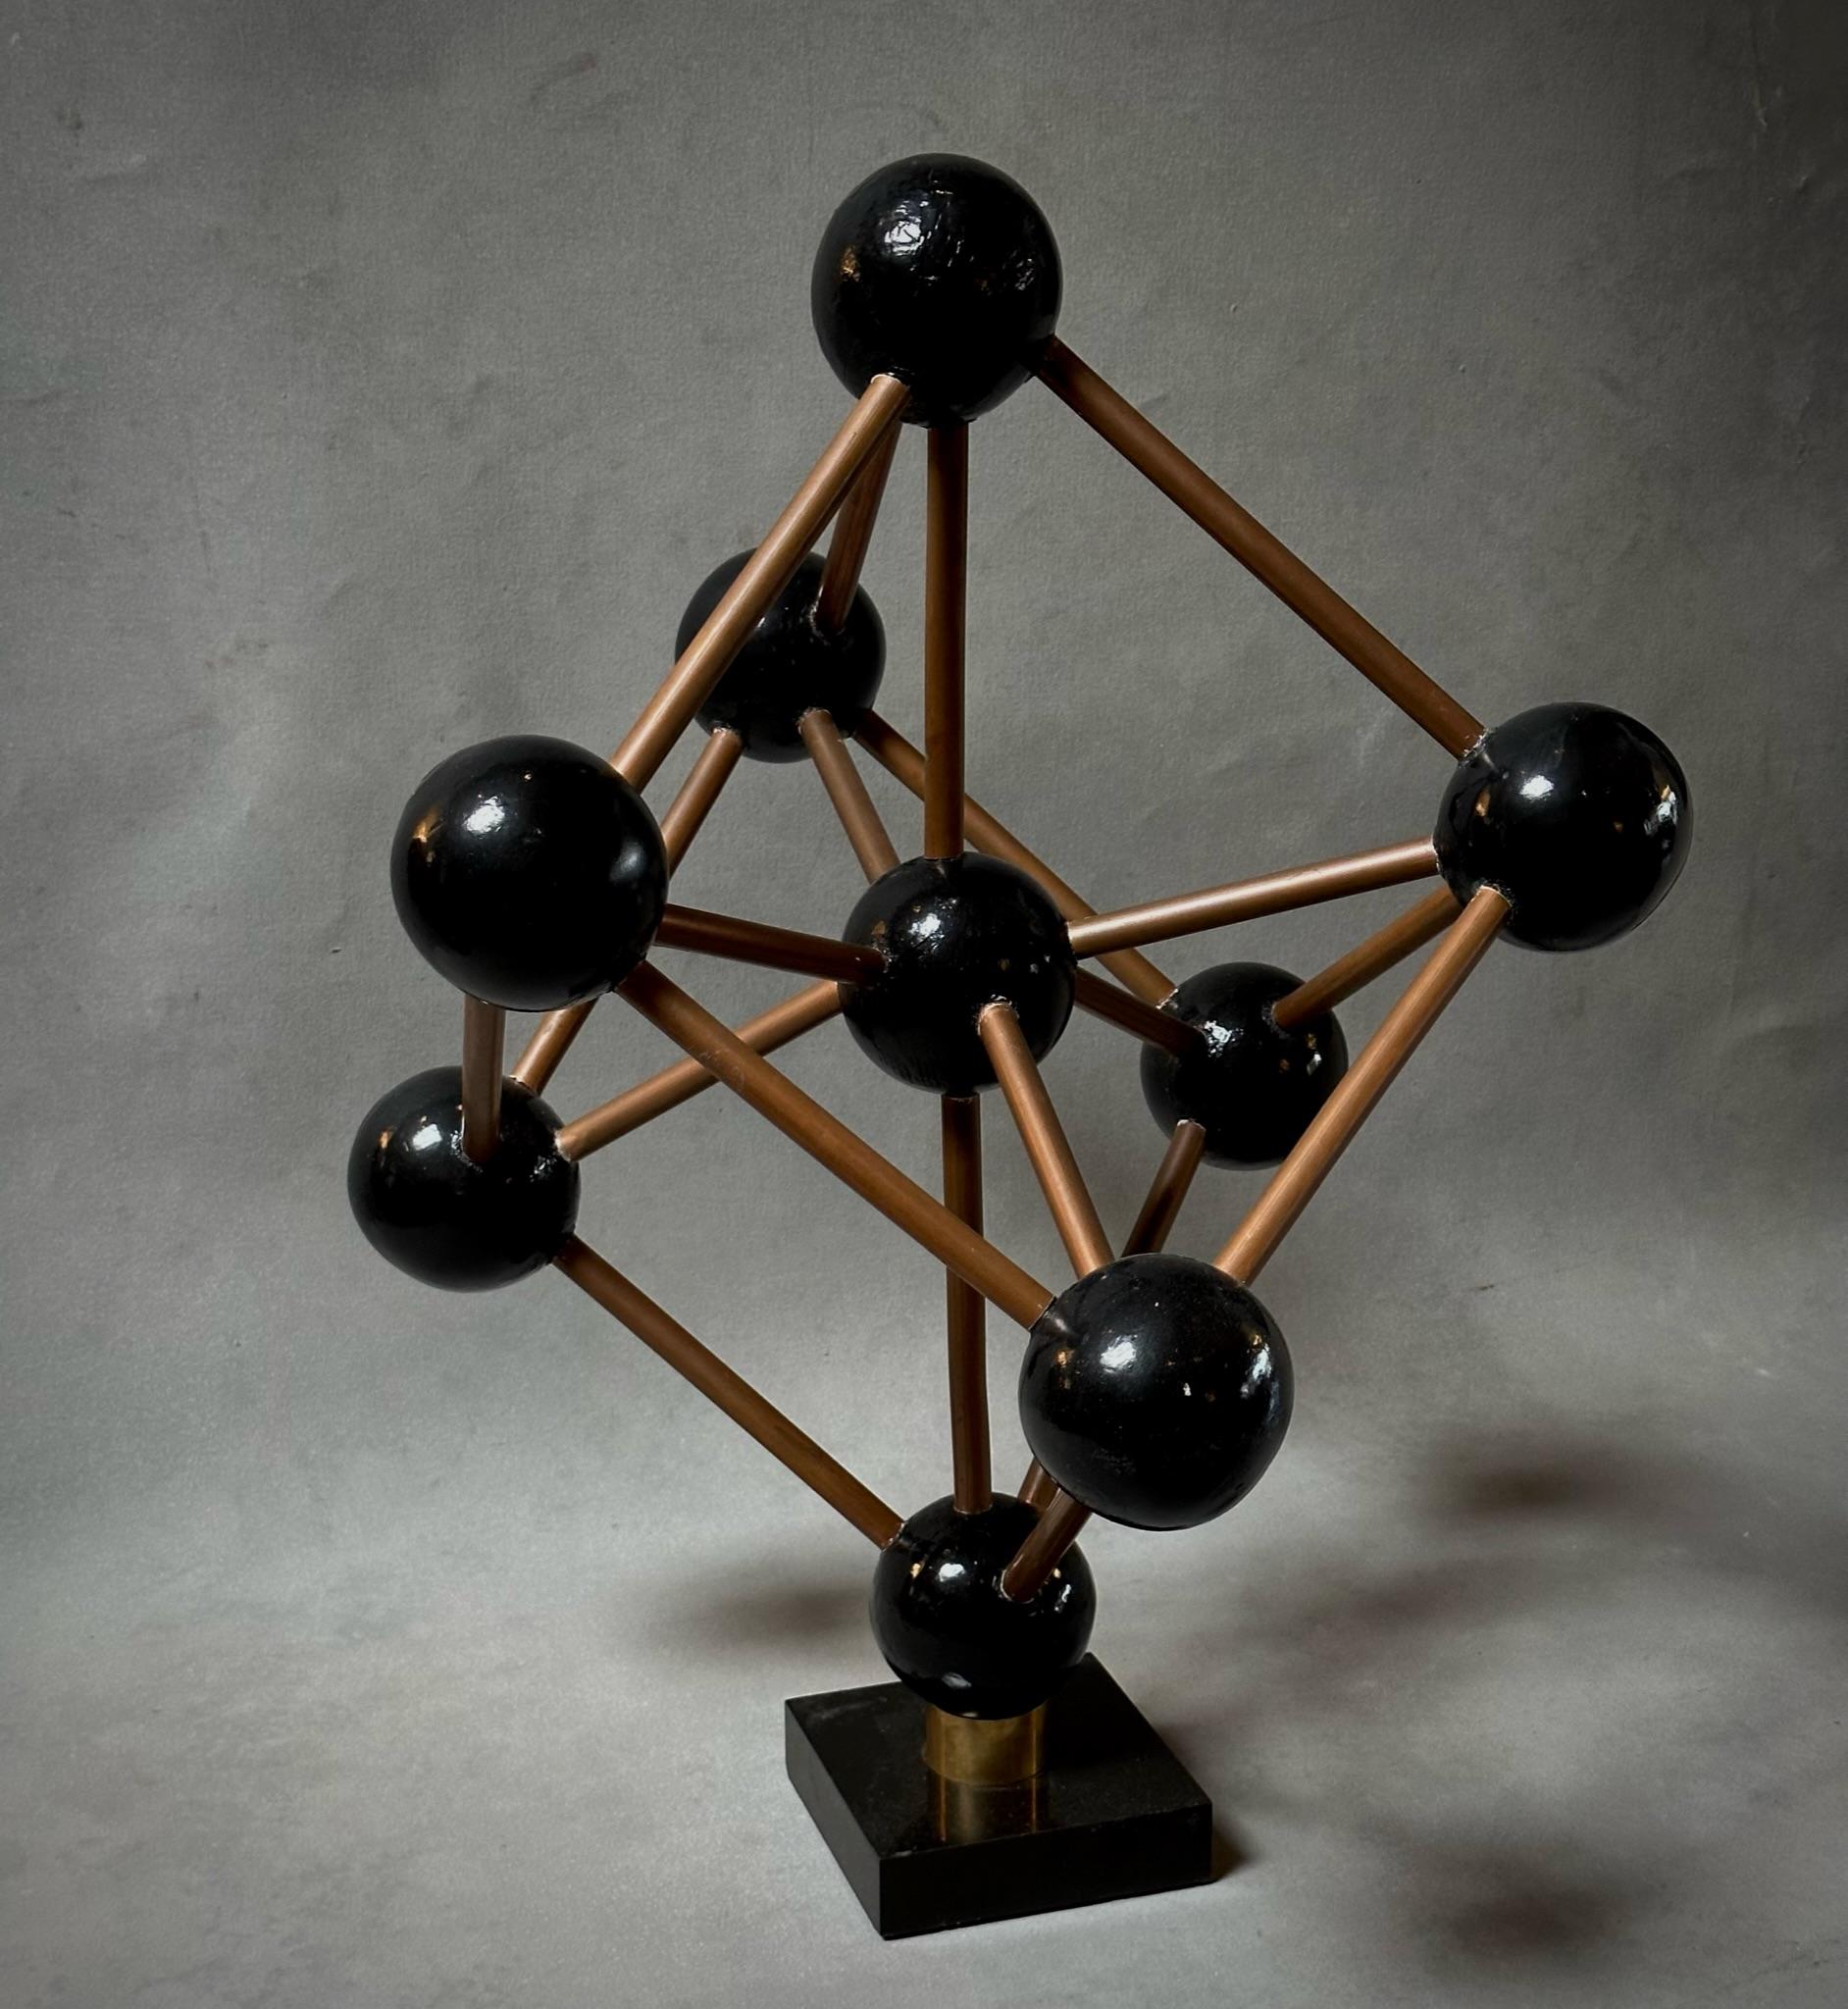 Belgian midcentury geometric model featuring ebonized wood spheres connected by metal rods in a graphic modular pattern mounted on black marble base. A unique sculptural accent piece with a dynamic form. 

Belgium, circa 1960

Dimensions: 19W x